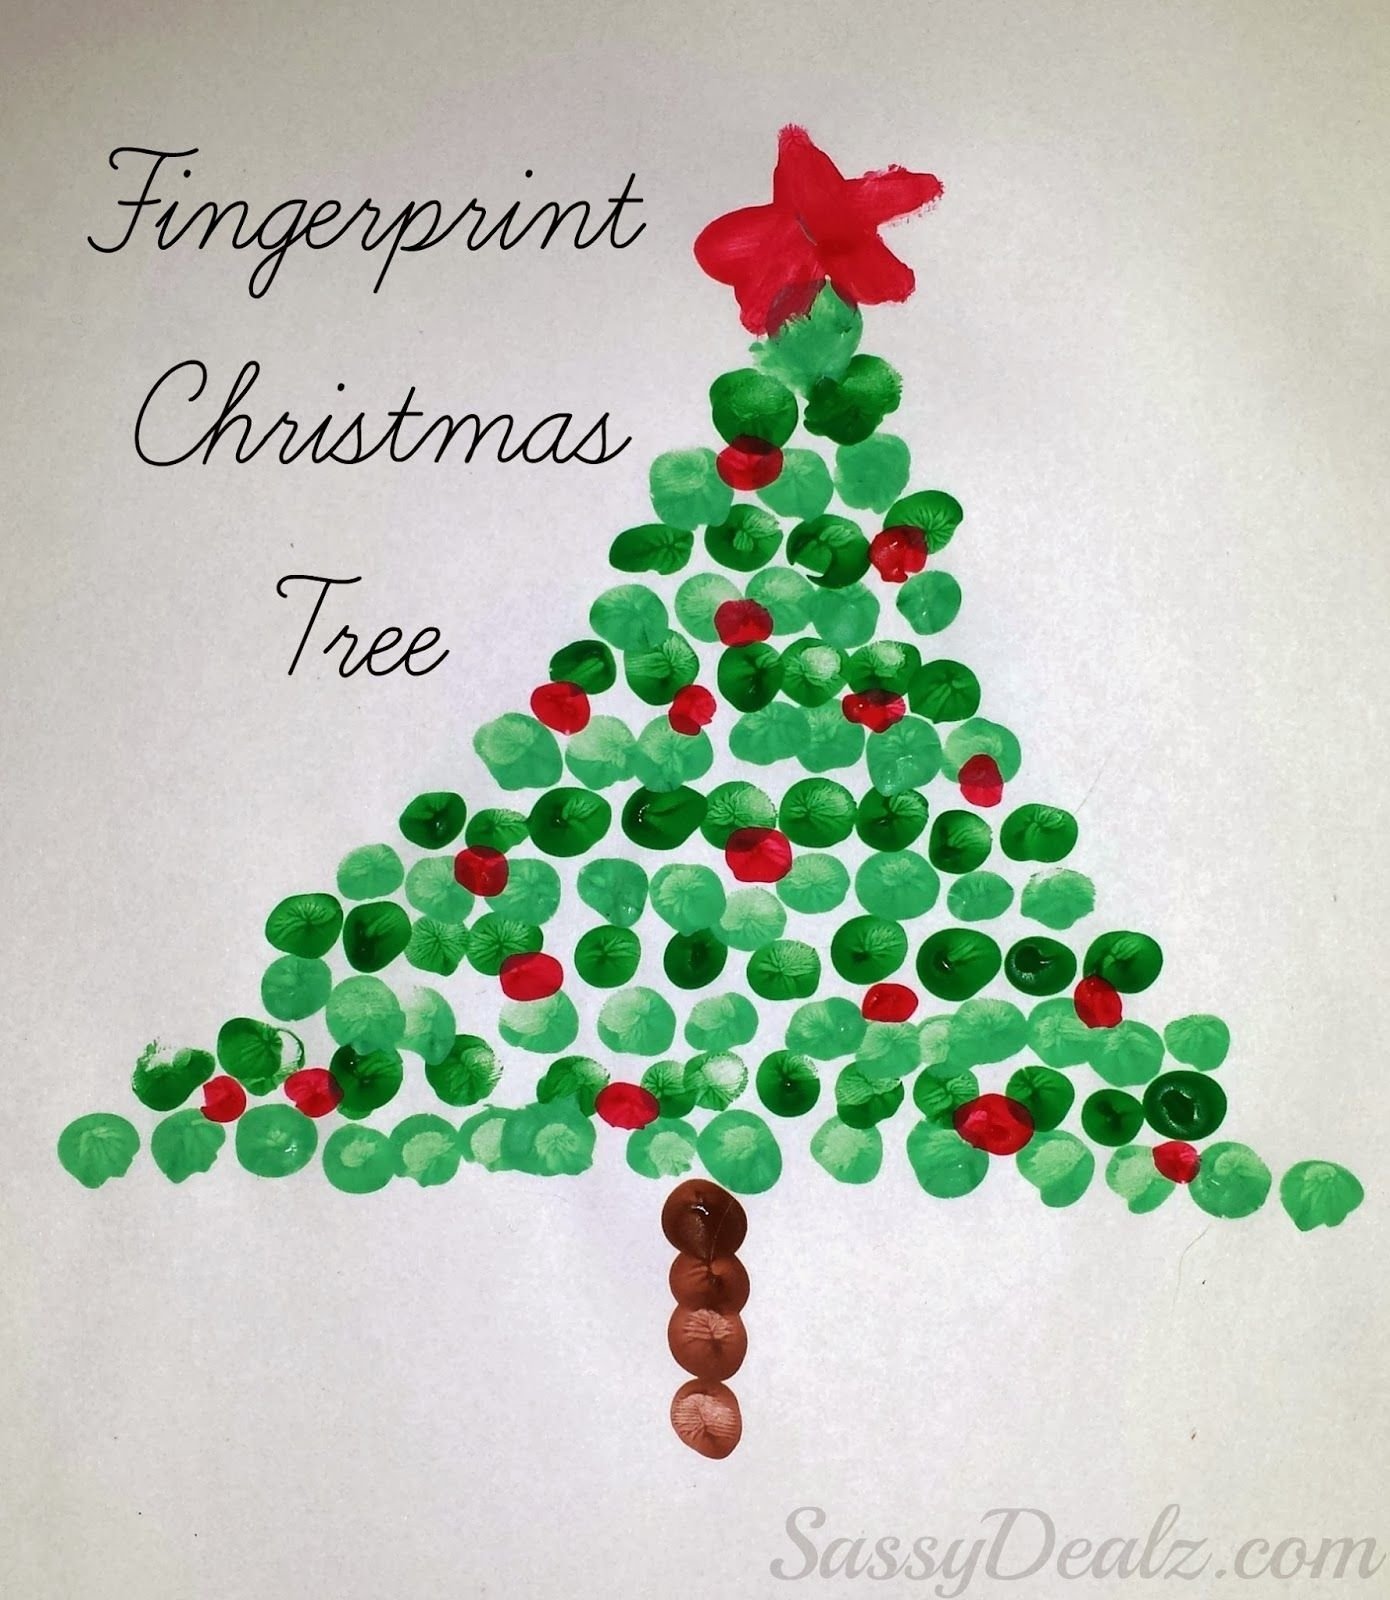 10 Pretty Christmas Arts And Craft Ideas christmas crafts for kids fingerprint christmas tree craft for 1 2022